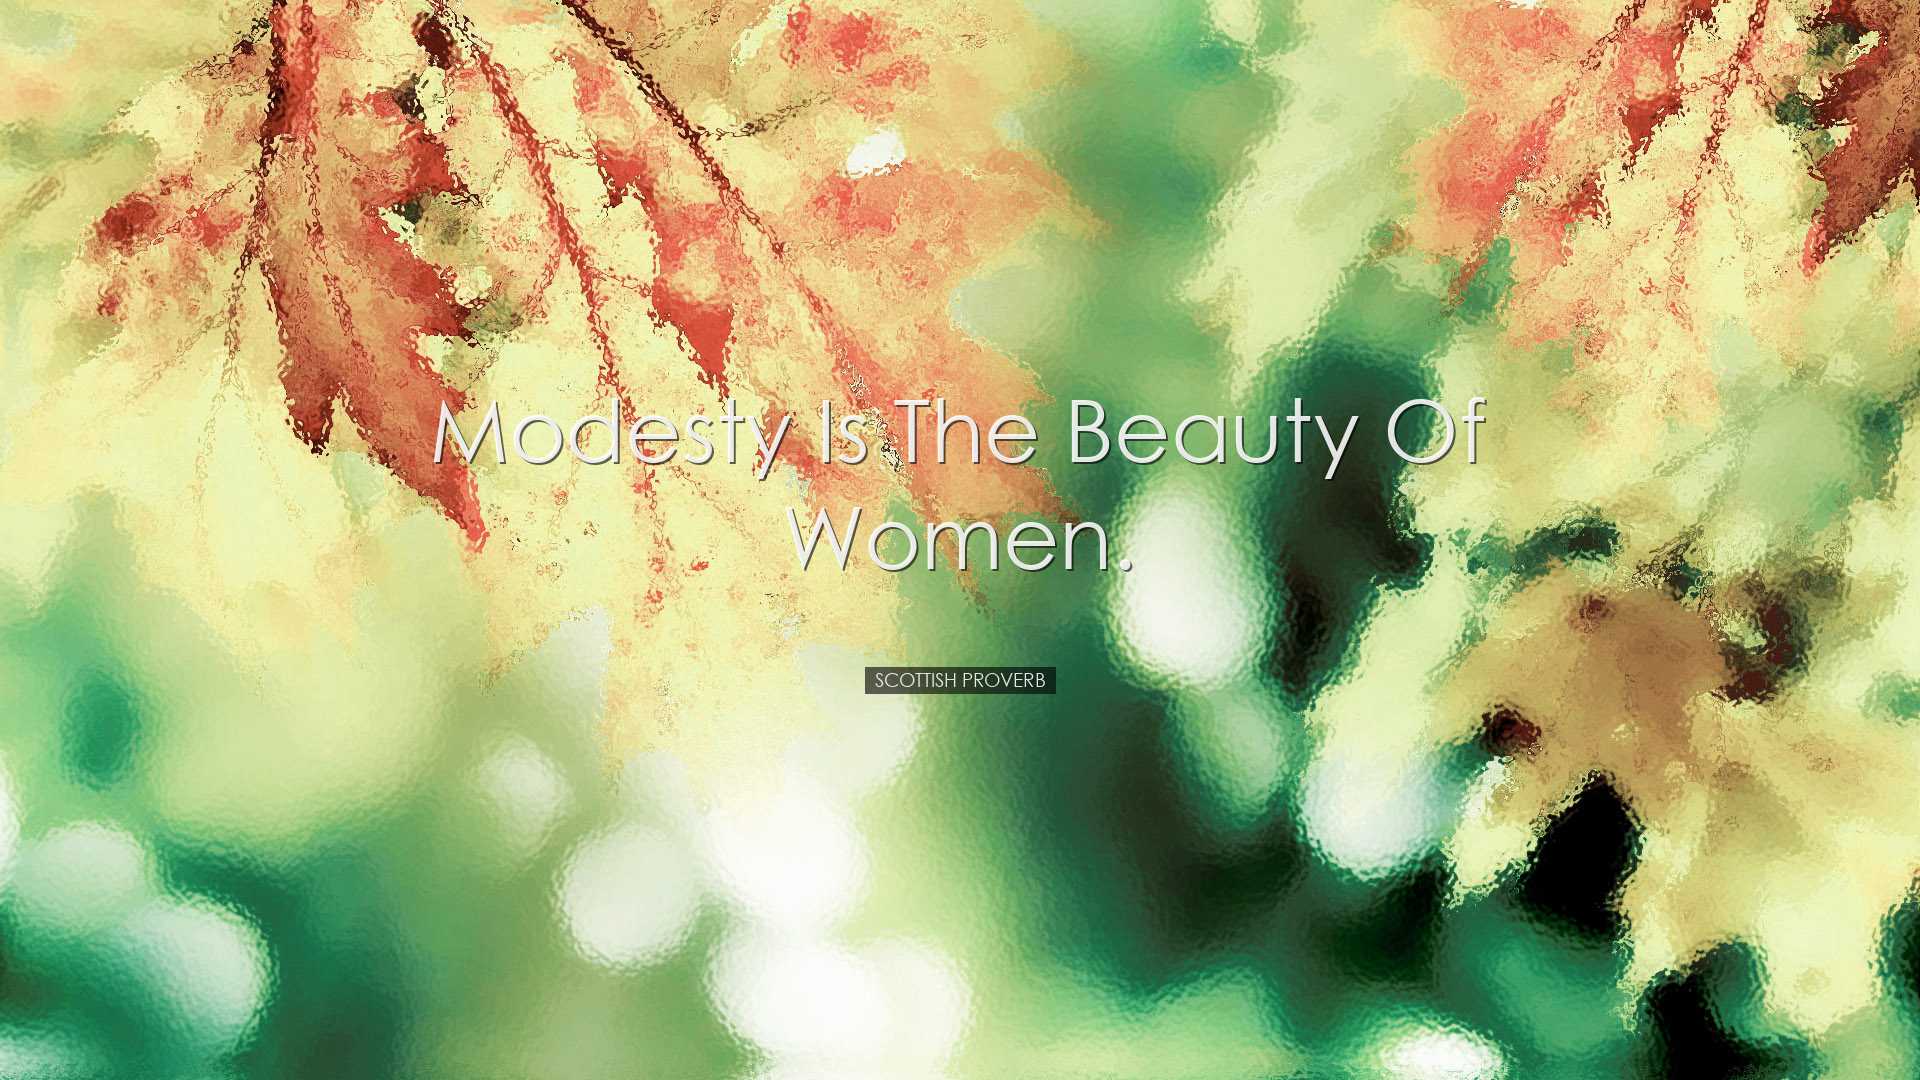 Modesty is the beauty of women. - Scottish Proverb